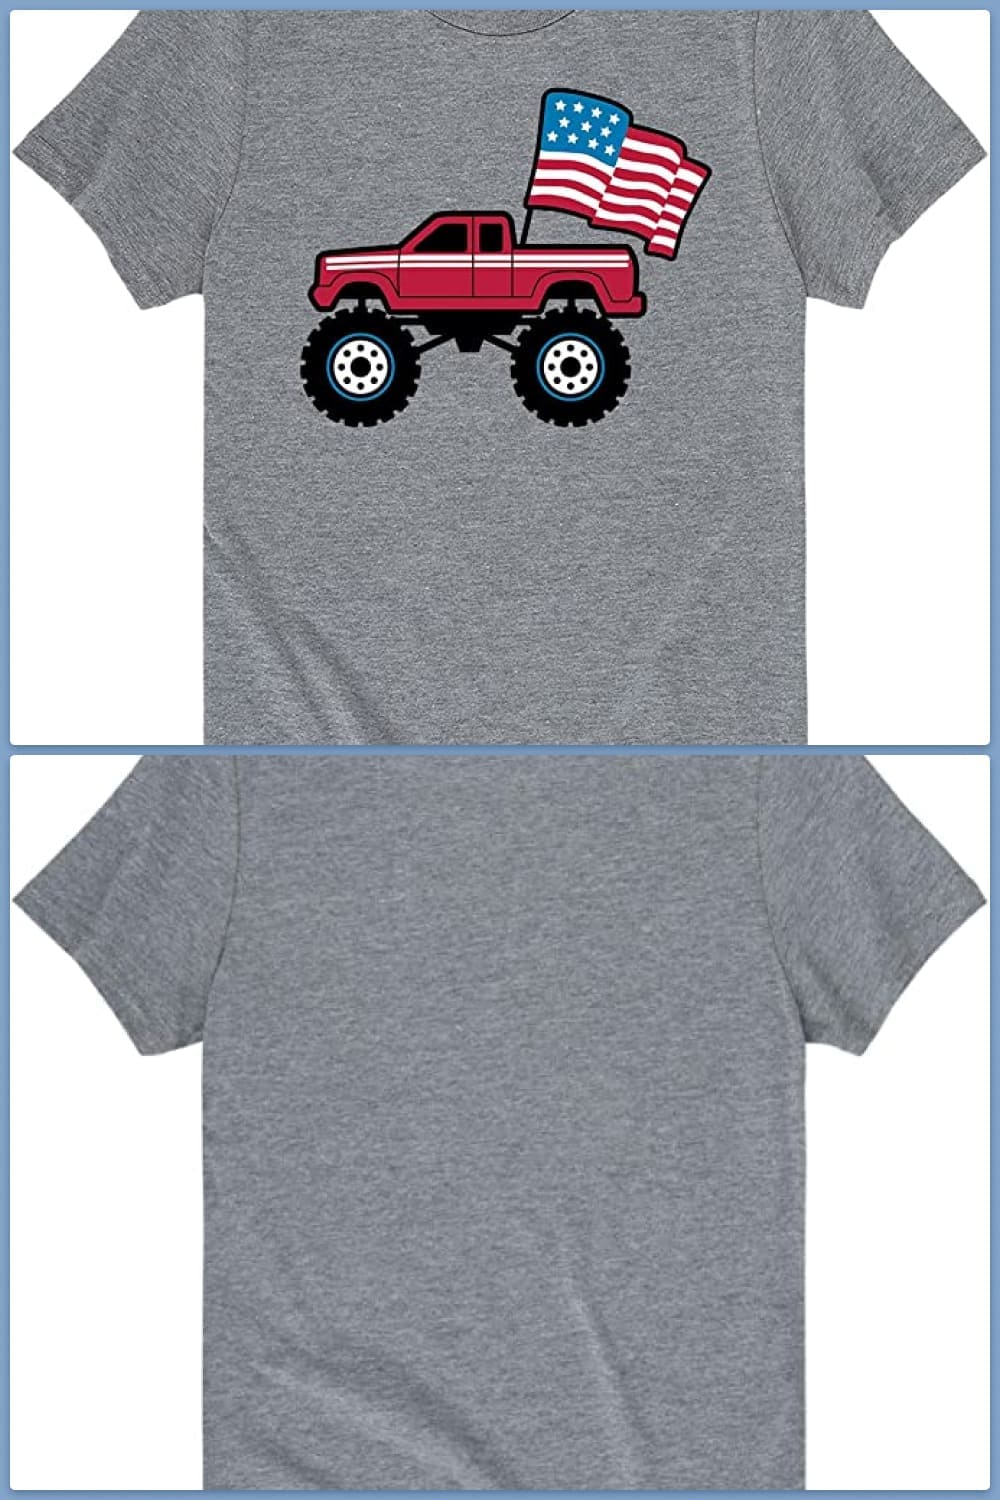 Gray t-shirt with red pickup truck and USA flag.